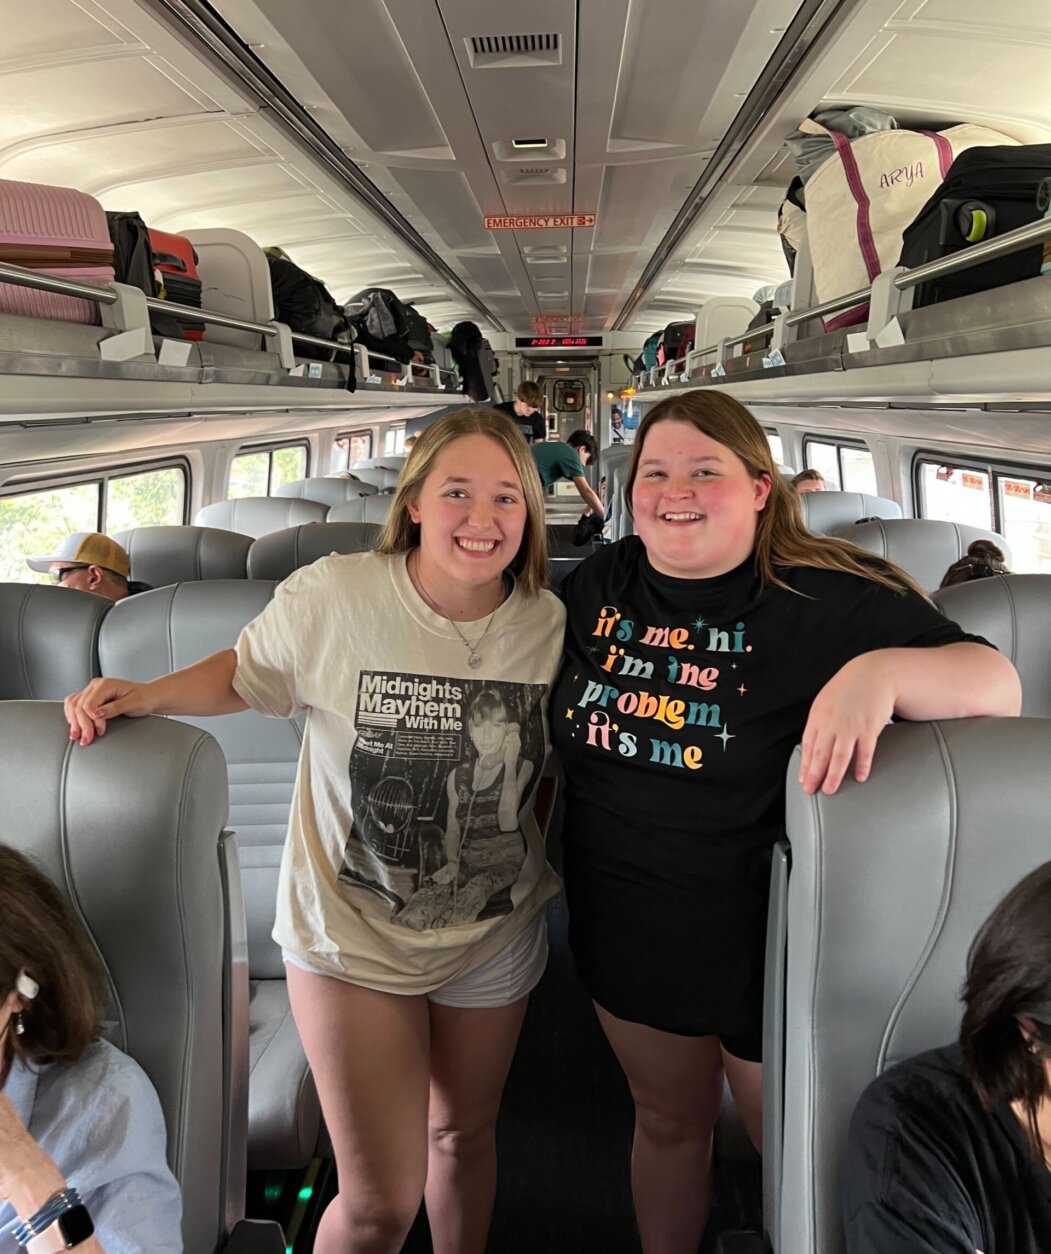 <p>Twins Kortney and Kassidy Thompson, rode an Amtrak train from their home in King George, Virginia, to Philadelphia&#8217;s 30th Street Station. It&#8217;s the first time the 21-year-olds have been to a concert since the COVID-19 pandemic and its also their first time traveling since the pandemic.</p>
<p>&#8220;It&#8217;s historical in nature,&#8221; Kassidy said of Swift&#8217;s sold out tour.</p>
<p>The journey required the family to wake up at 4 a.m. to board Amtrak&#8217;s Northeast Regional line but that didn&#8217;t stop them from wearing Swift&#8217;s merch.</p>
<p>Kortney bought two outfits for the show and some of their accessories include disco ball earrings and heart shaped glasses (a look Swift adorned during her &#8220;Red&#8221; era).</p>
<p>&#8220;I&#8217;m kind of worried about my shoes,&#8221; Courtney said. &#8220;I got like sparkly like cowboy boots, underwear, but I haven&#8217;t worn them yet.&#8221;</p>
<p>Another accessory is a painted 13 of the twins&#8217; hands; Swift&#8217;s fans often put her lucky-number 13 on their hands for shows — a good-luck charm the singer has used since she was a teenager.</p>
<p>The sisters grew up listening to Swift&#8217;s music.</p>
<p>&#8220;I remember watching the music videos or like CMT when I was like eight years old,&#8221; Kortney said.</p>
